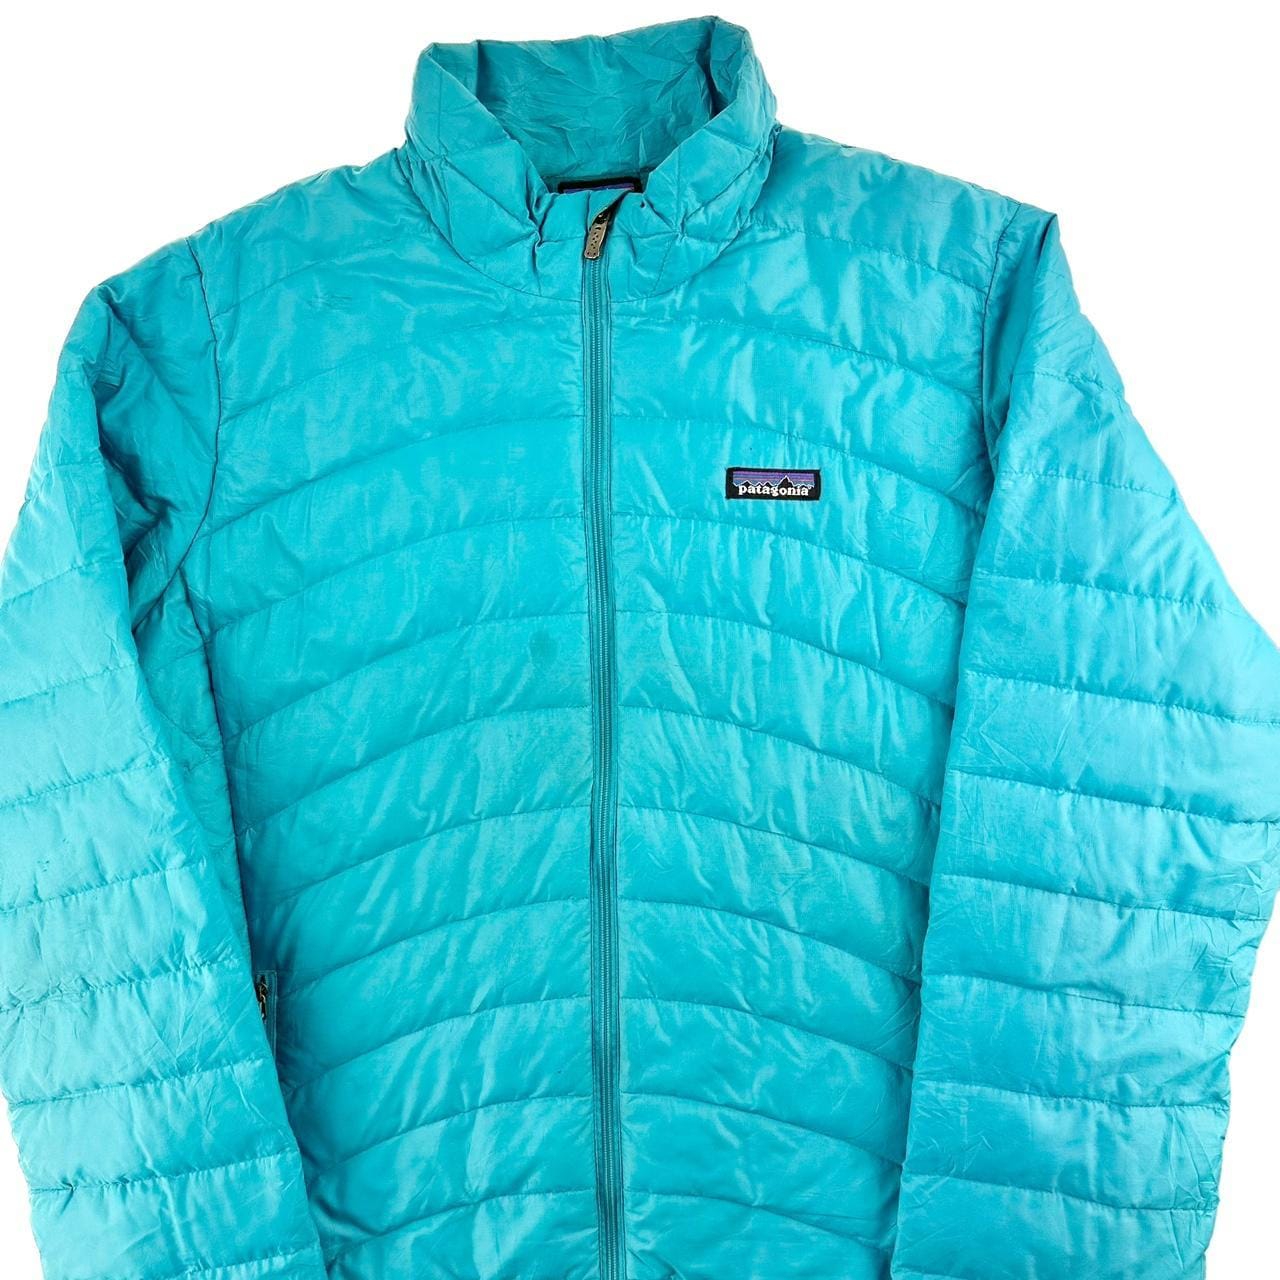 Patagonia padded jacket woman's size XL - second wave vintage store